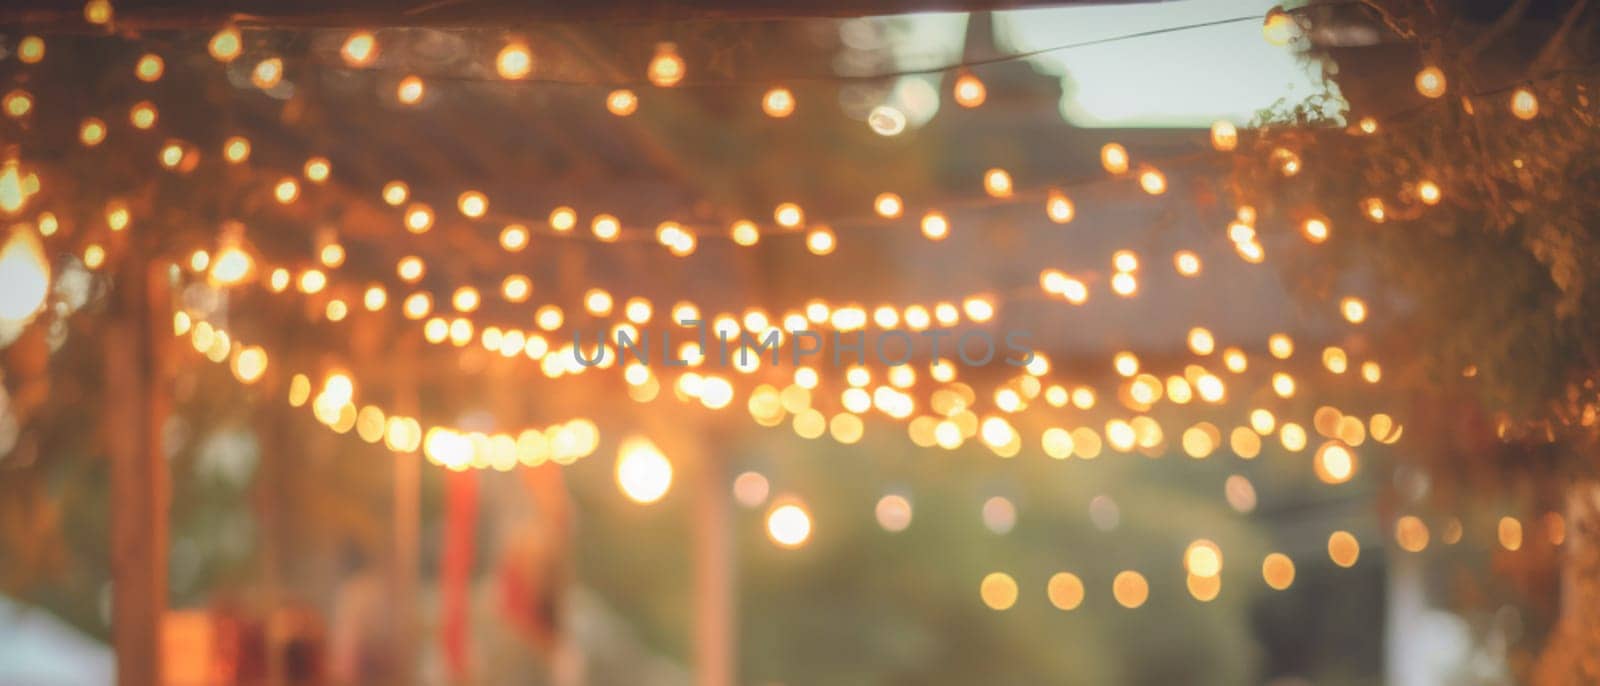 Abstract Blurred image of Night Festival in garden with bokeh for background usage. Concept of vintage tones.